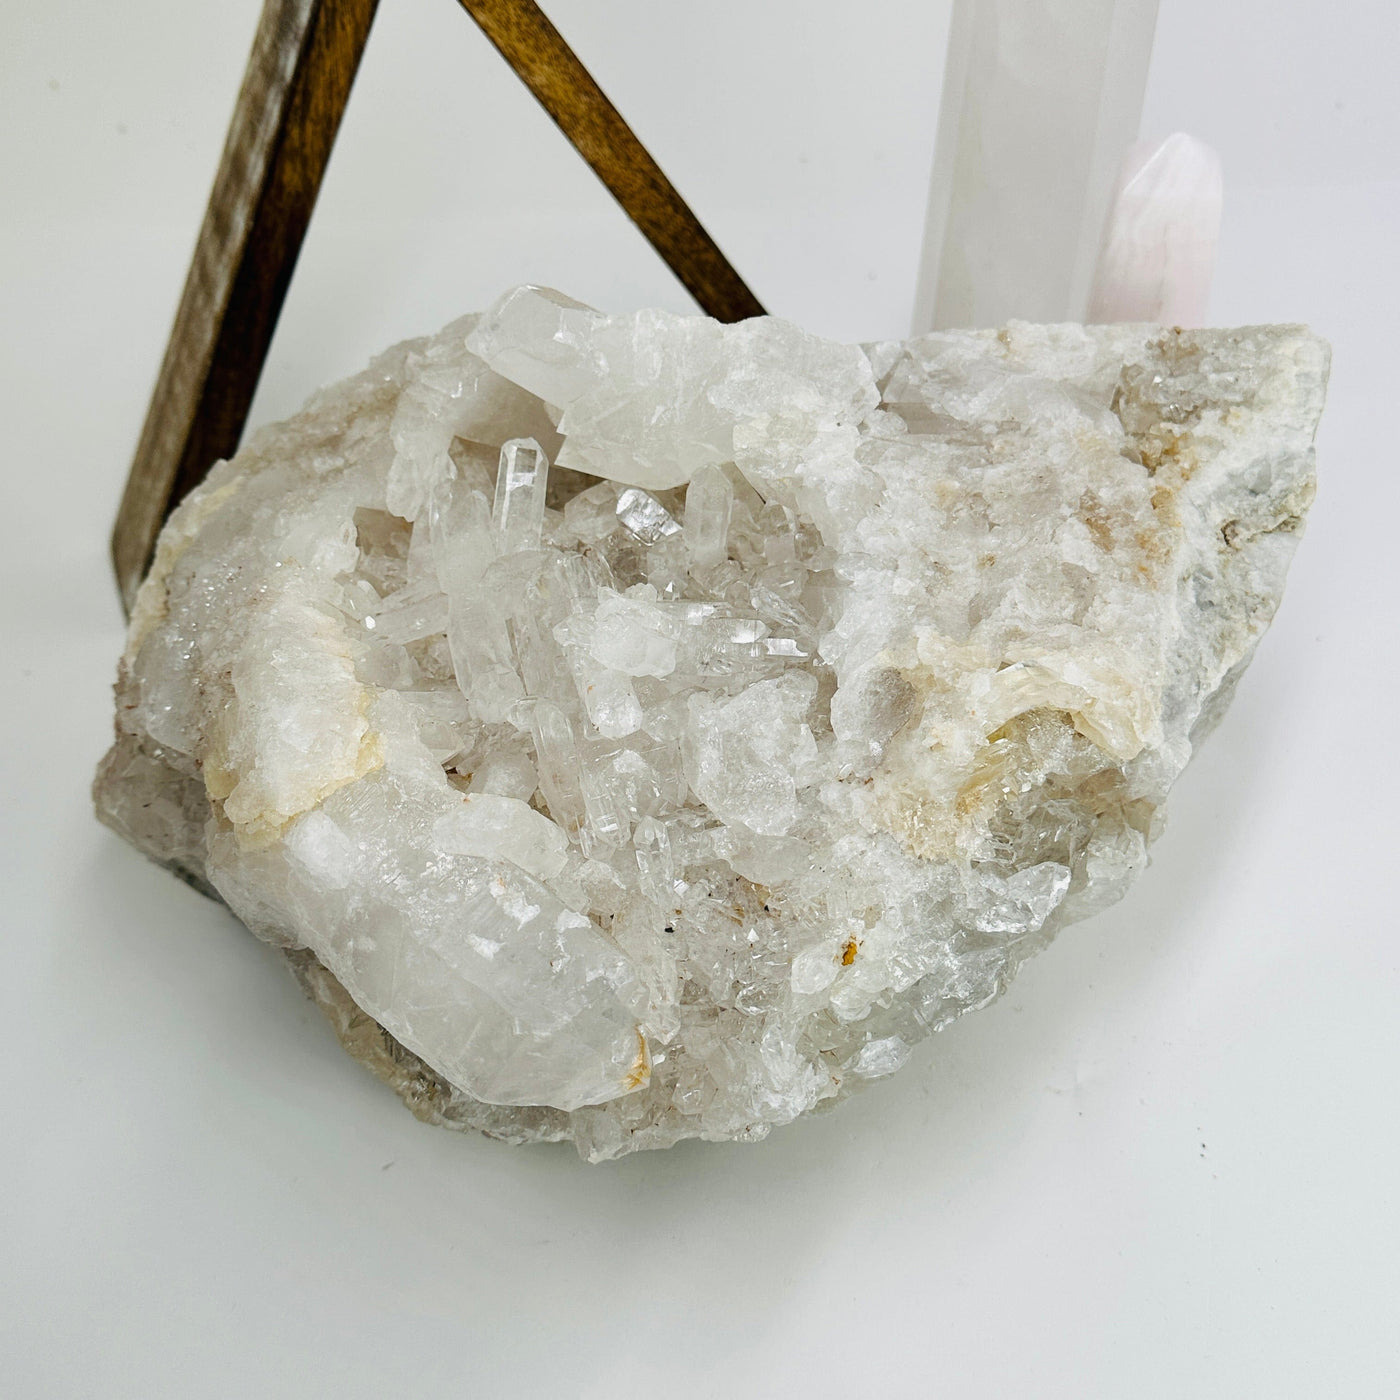 Crystal quartz cluster with decorations in the background